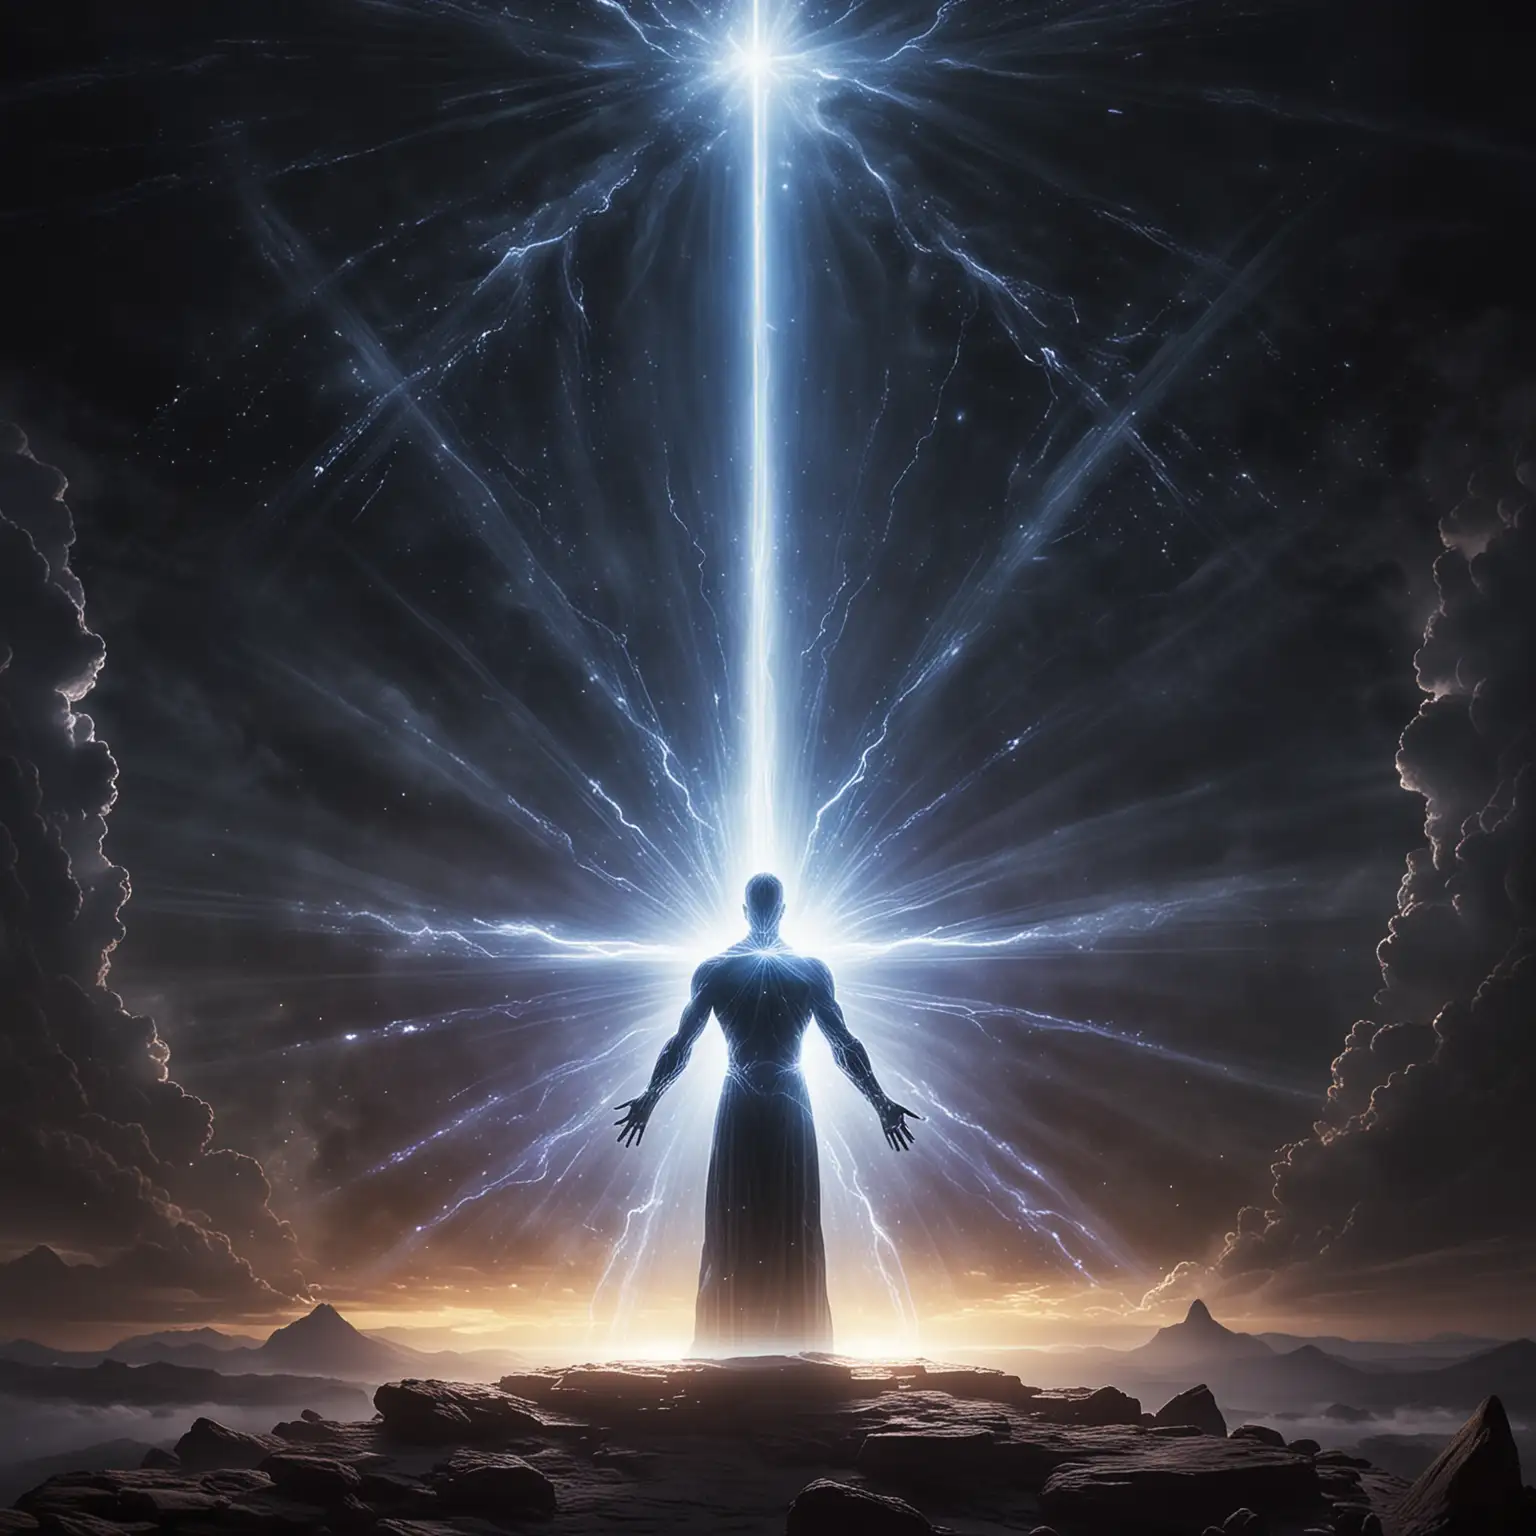 Make a visually powerful image of the forces of light and darkness clashing in the spiritual realm. Encompass higher consciousness and incorporate rays of light bursting though the darkness.